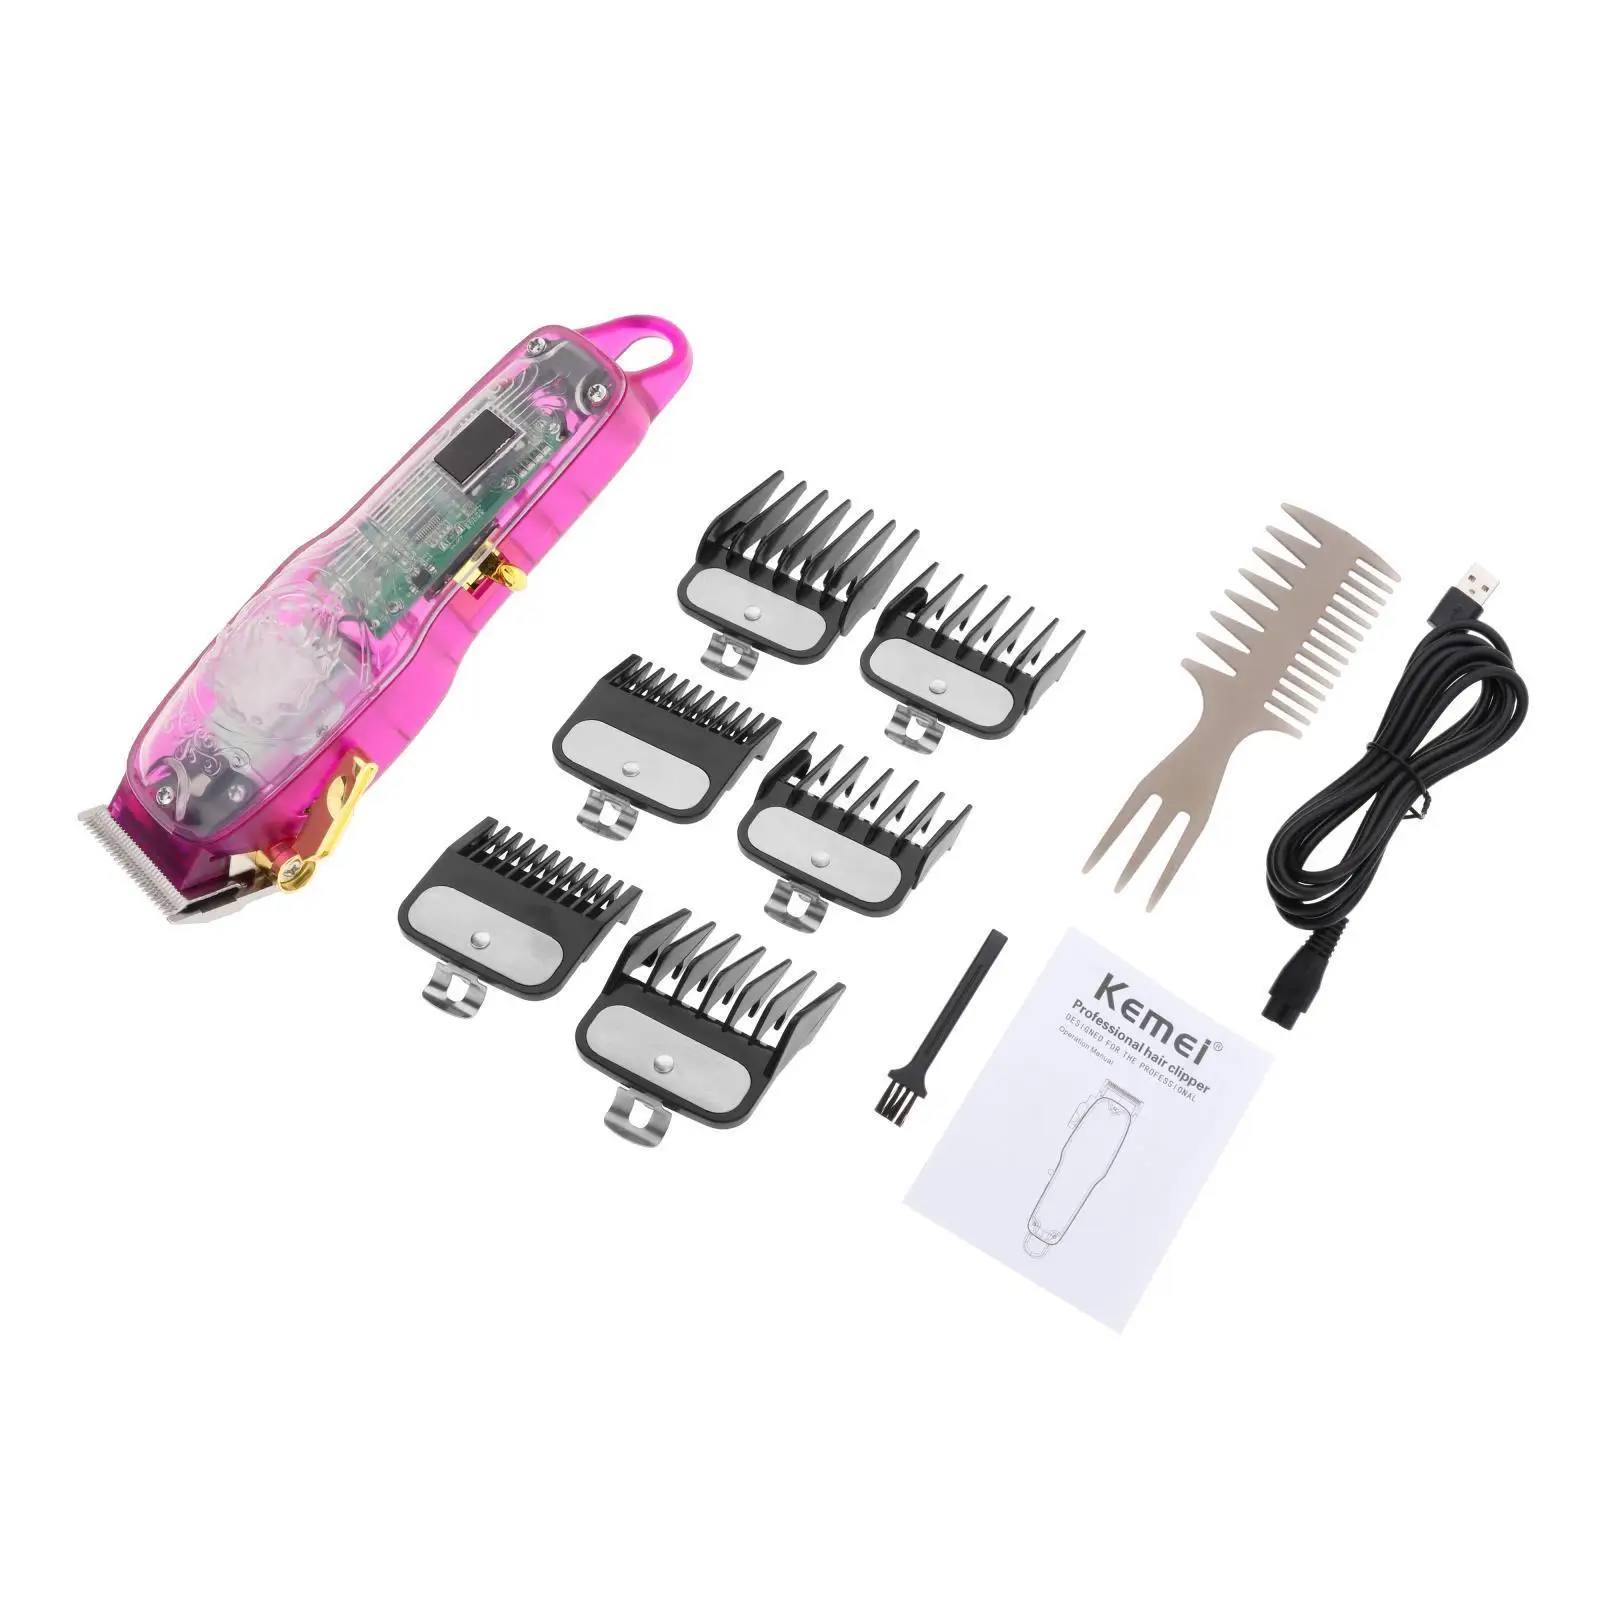 Pro Hair Trimmer Clippers Shaving Machine Cutting Beard Cordless Barber Set